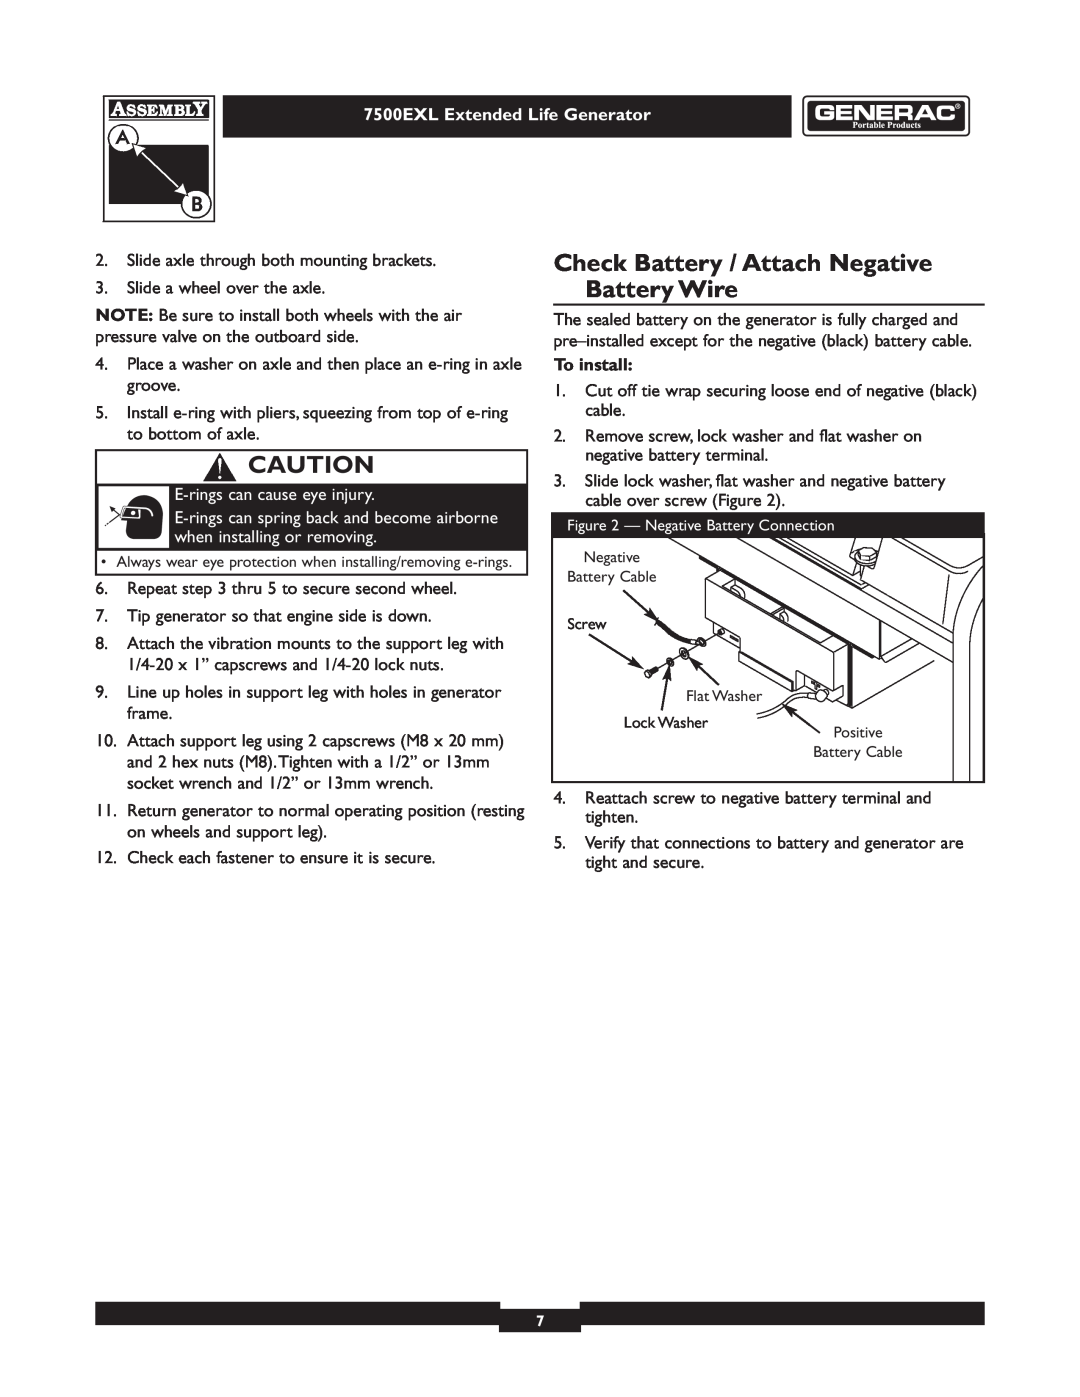 Generac 101 9-3 Check Battery / Attach Negative Battery Wire, E-rings can cause eye injury, To install 